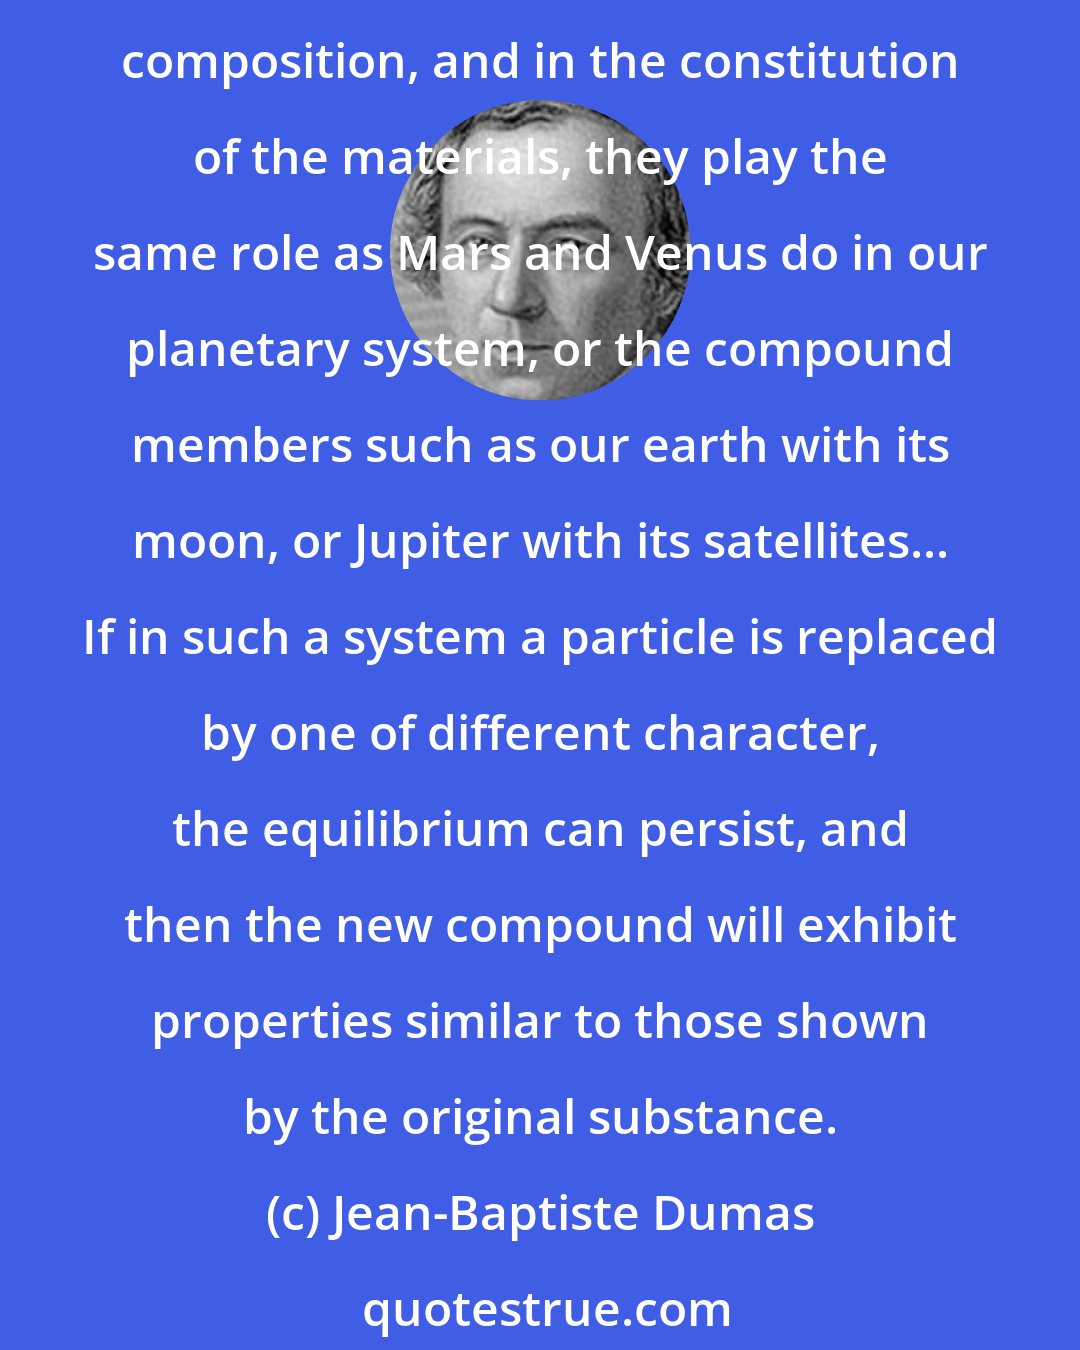 Jean-Baptiste Dumas: The chemical compounds are comparable to a system of planets in that the atoms are held together by chemical affinity. They may be more or less numerous, simple or complex in composition, and in the constitution of the materials, they play the same role as Mars and Venus do in our planetary system, or the compound members such as our earth with its moon, or Jupiter with its satellites... If in such a system a particle is replaced by one of different character, the equilibrium can persist, and then the new compound will exhibit properties similar to those shown by the original substance.